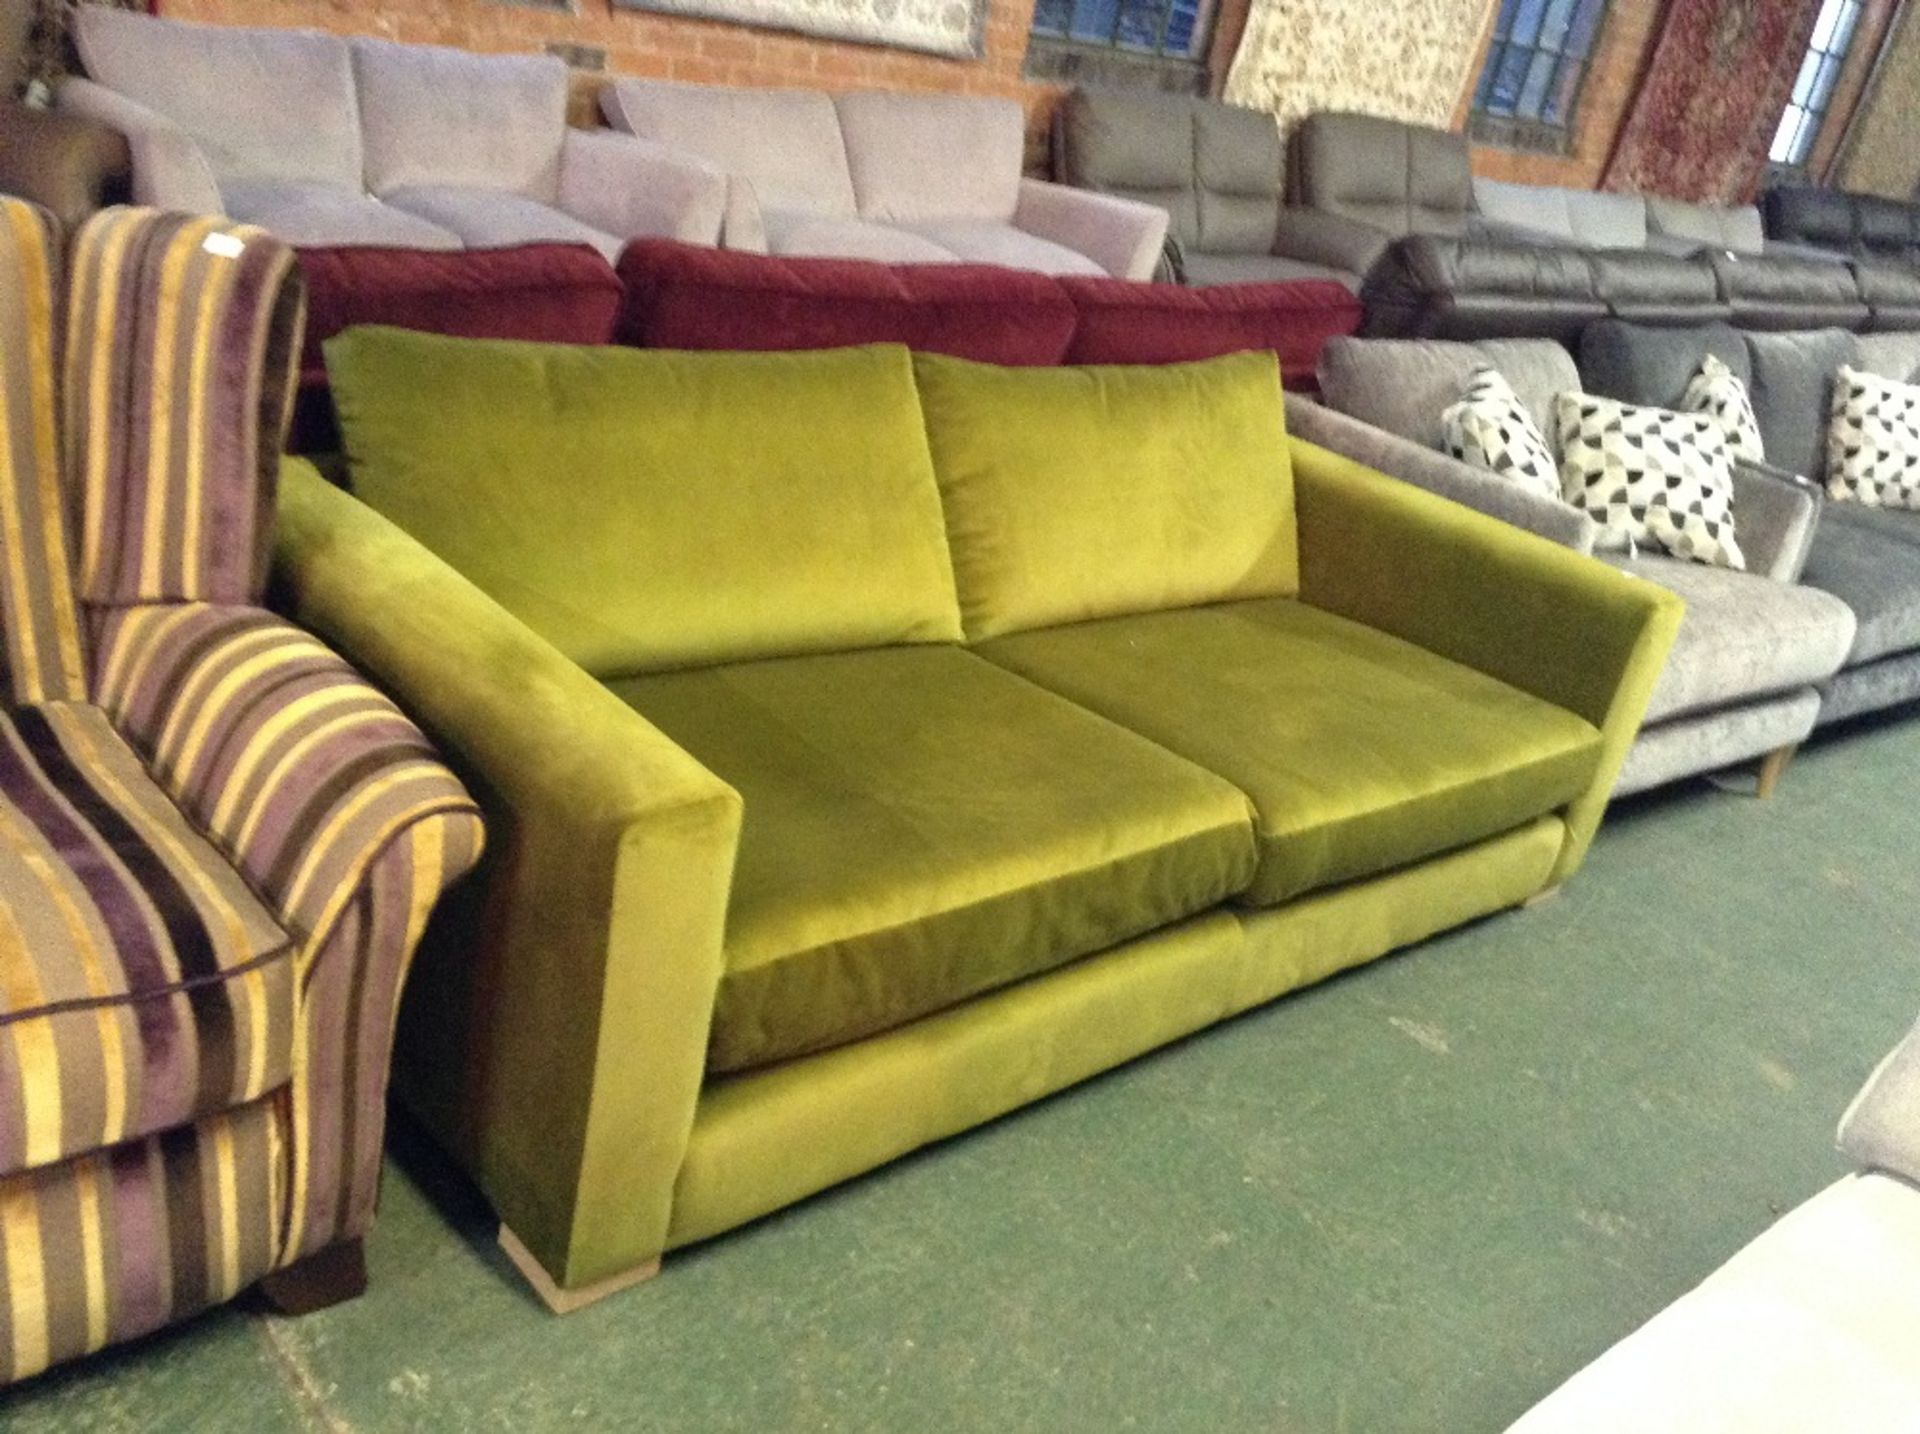 LIME GREEN 3 SEATER SOFA